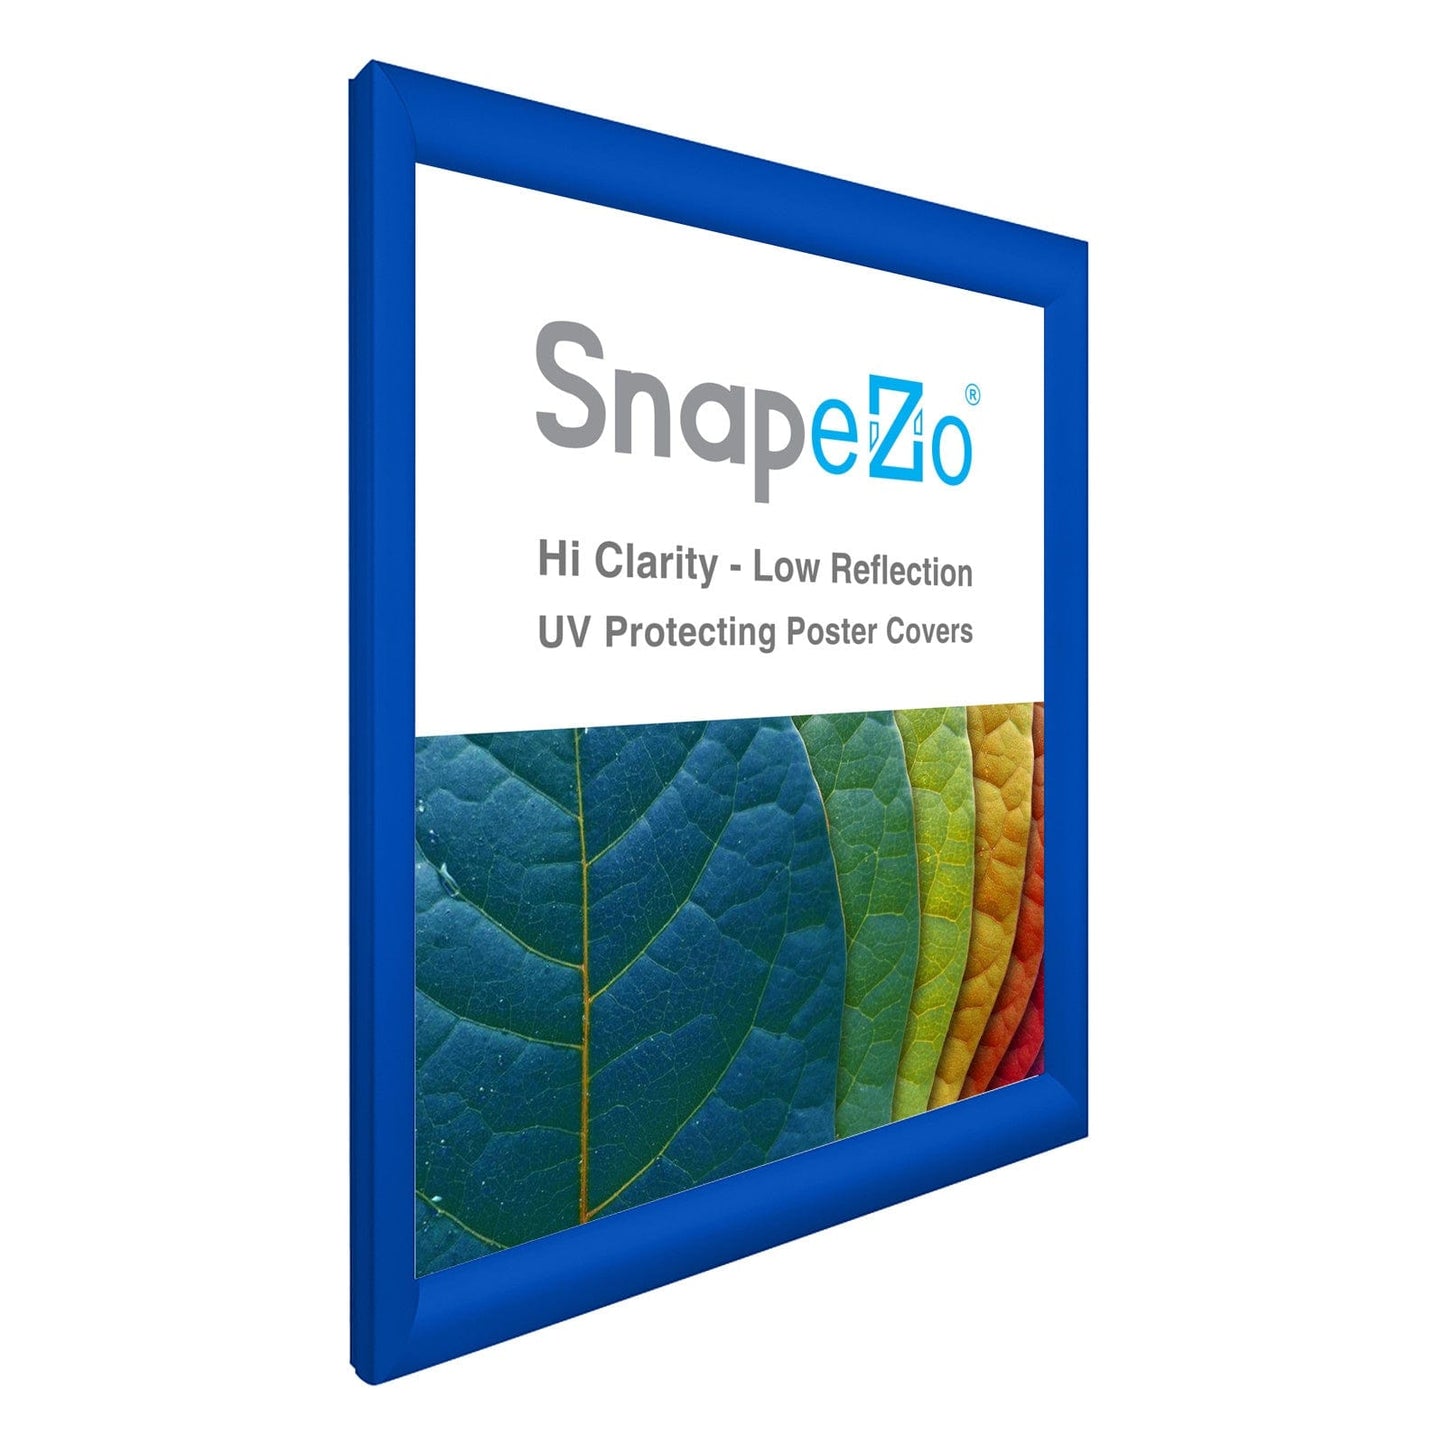 17x21 Blue SnapeZo® Snap Frame - 1.2" Profile - Snap Frames Direct